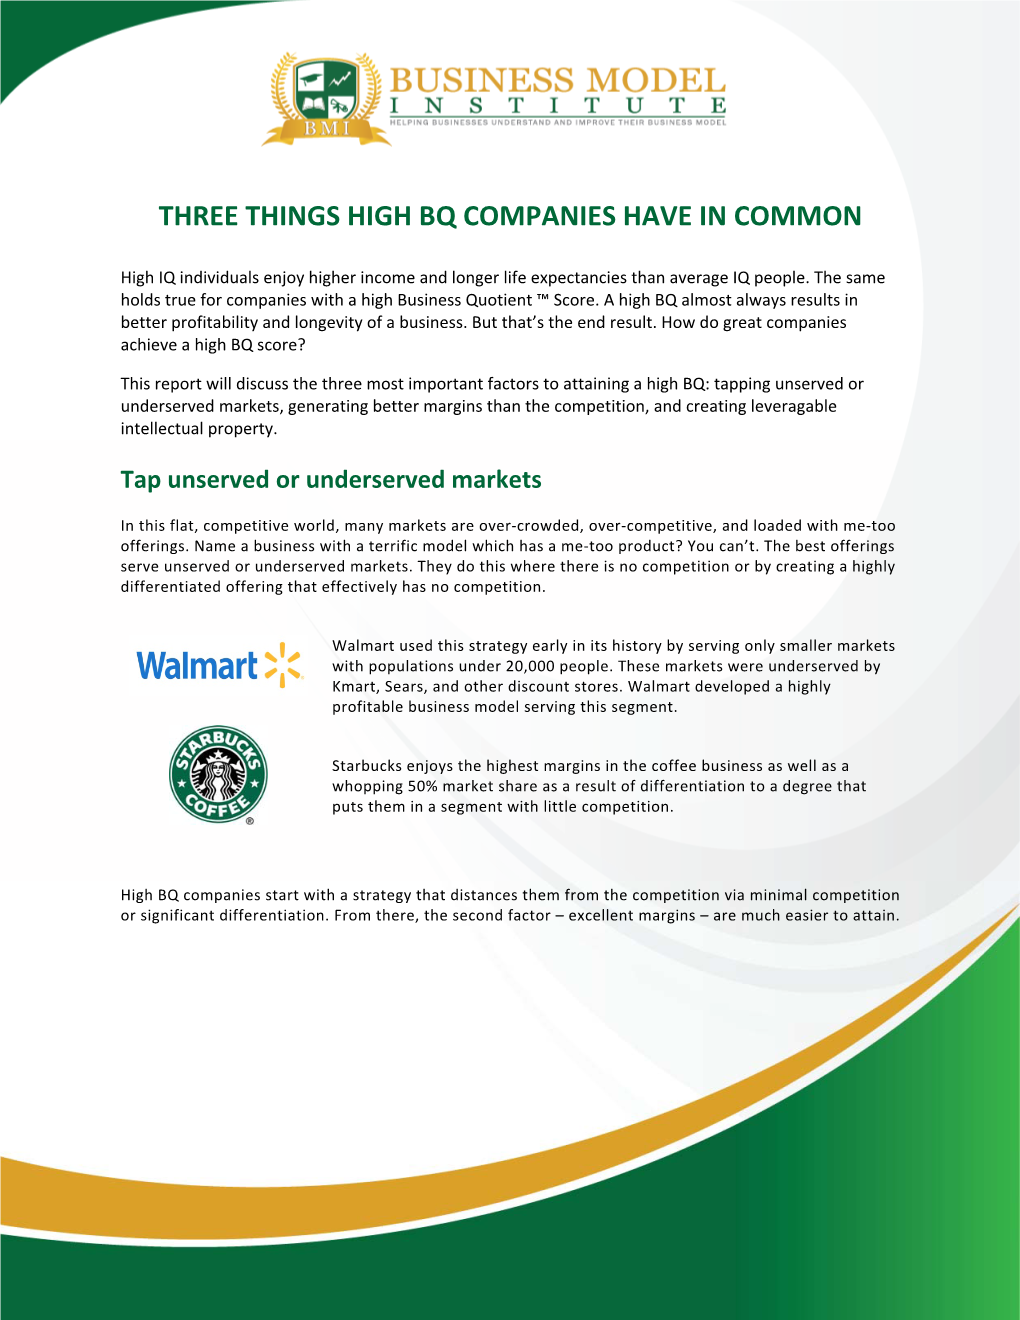 Three Things High Bq Companies Have in Common